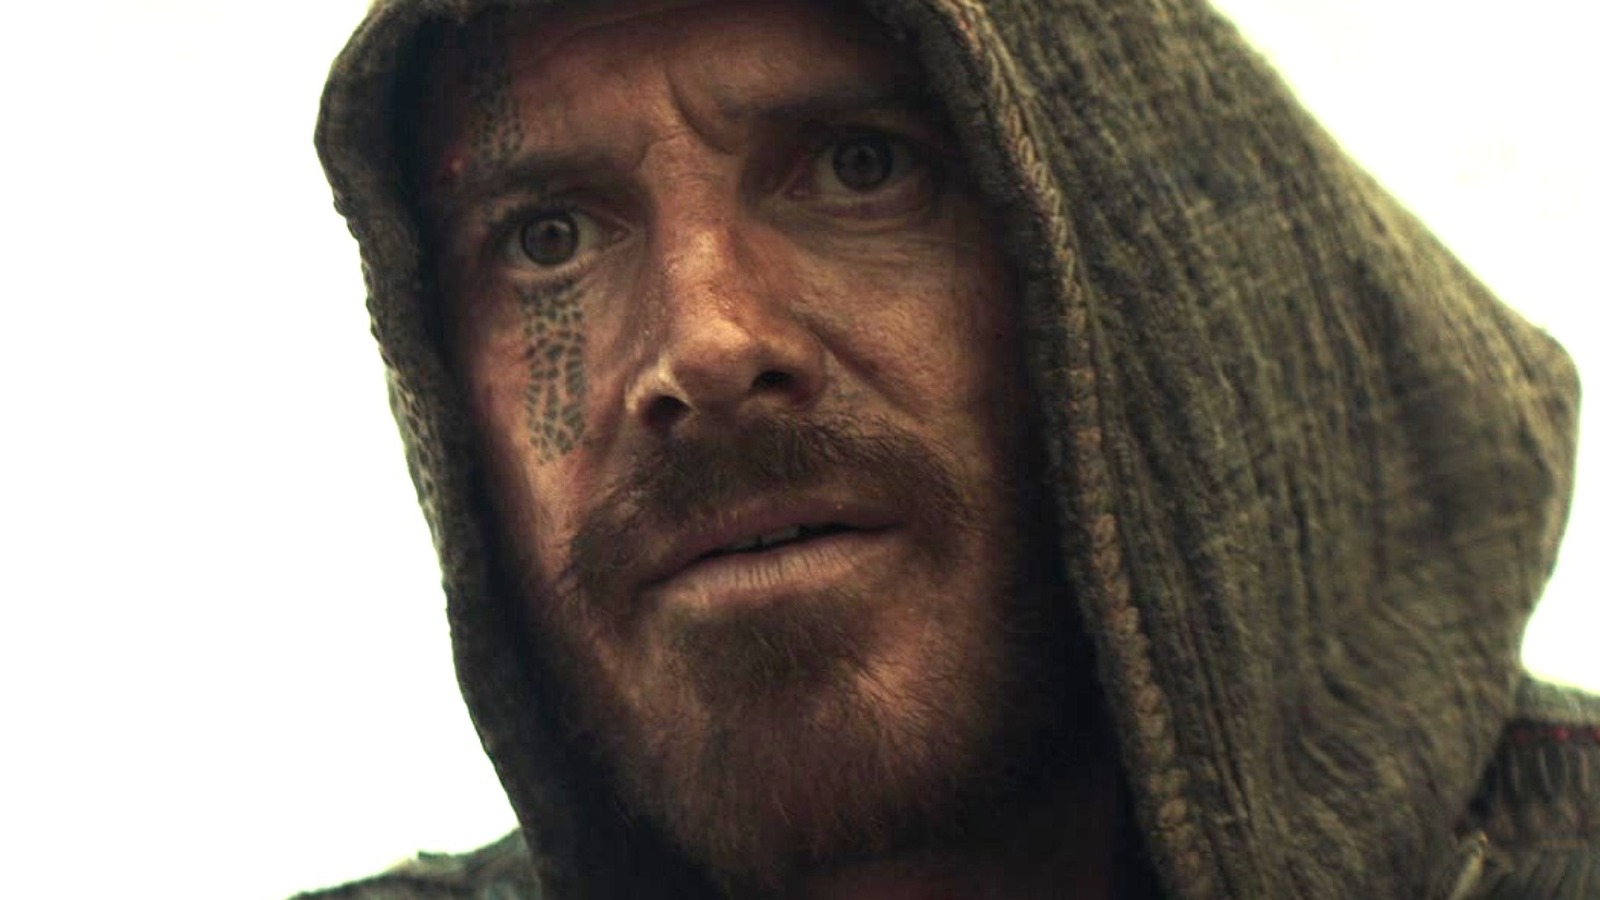 Assassin's Creed shouldn't have been a movie — it should be a TV